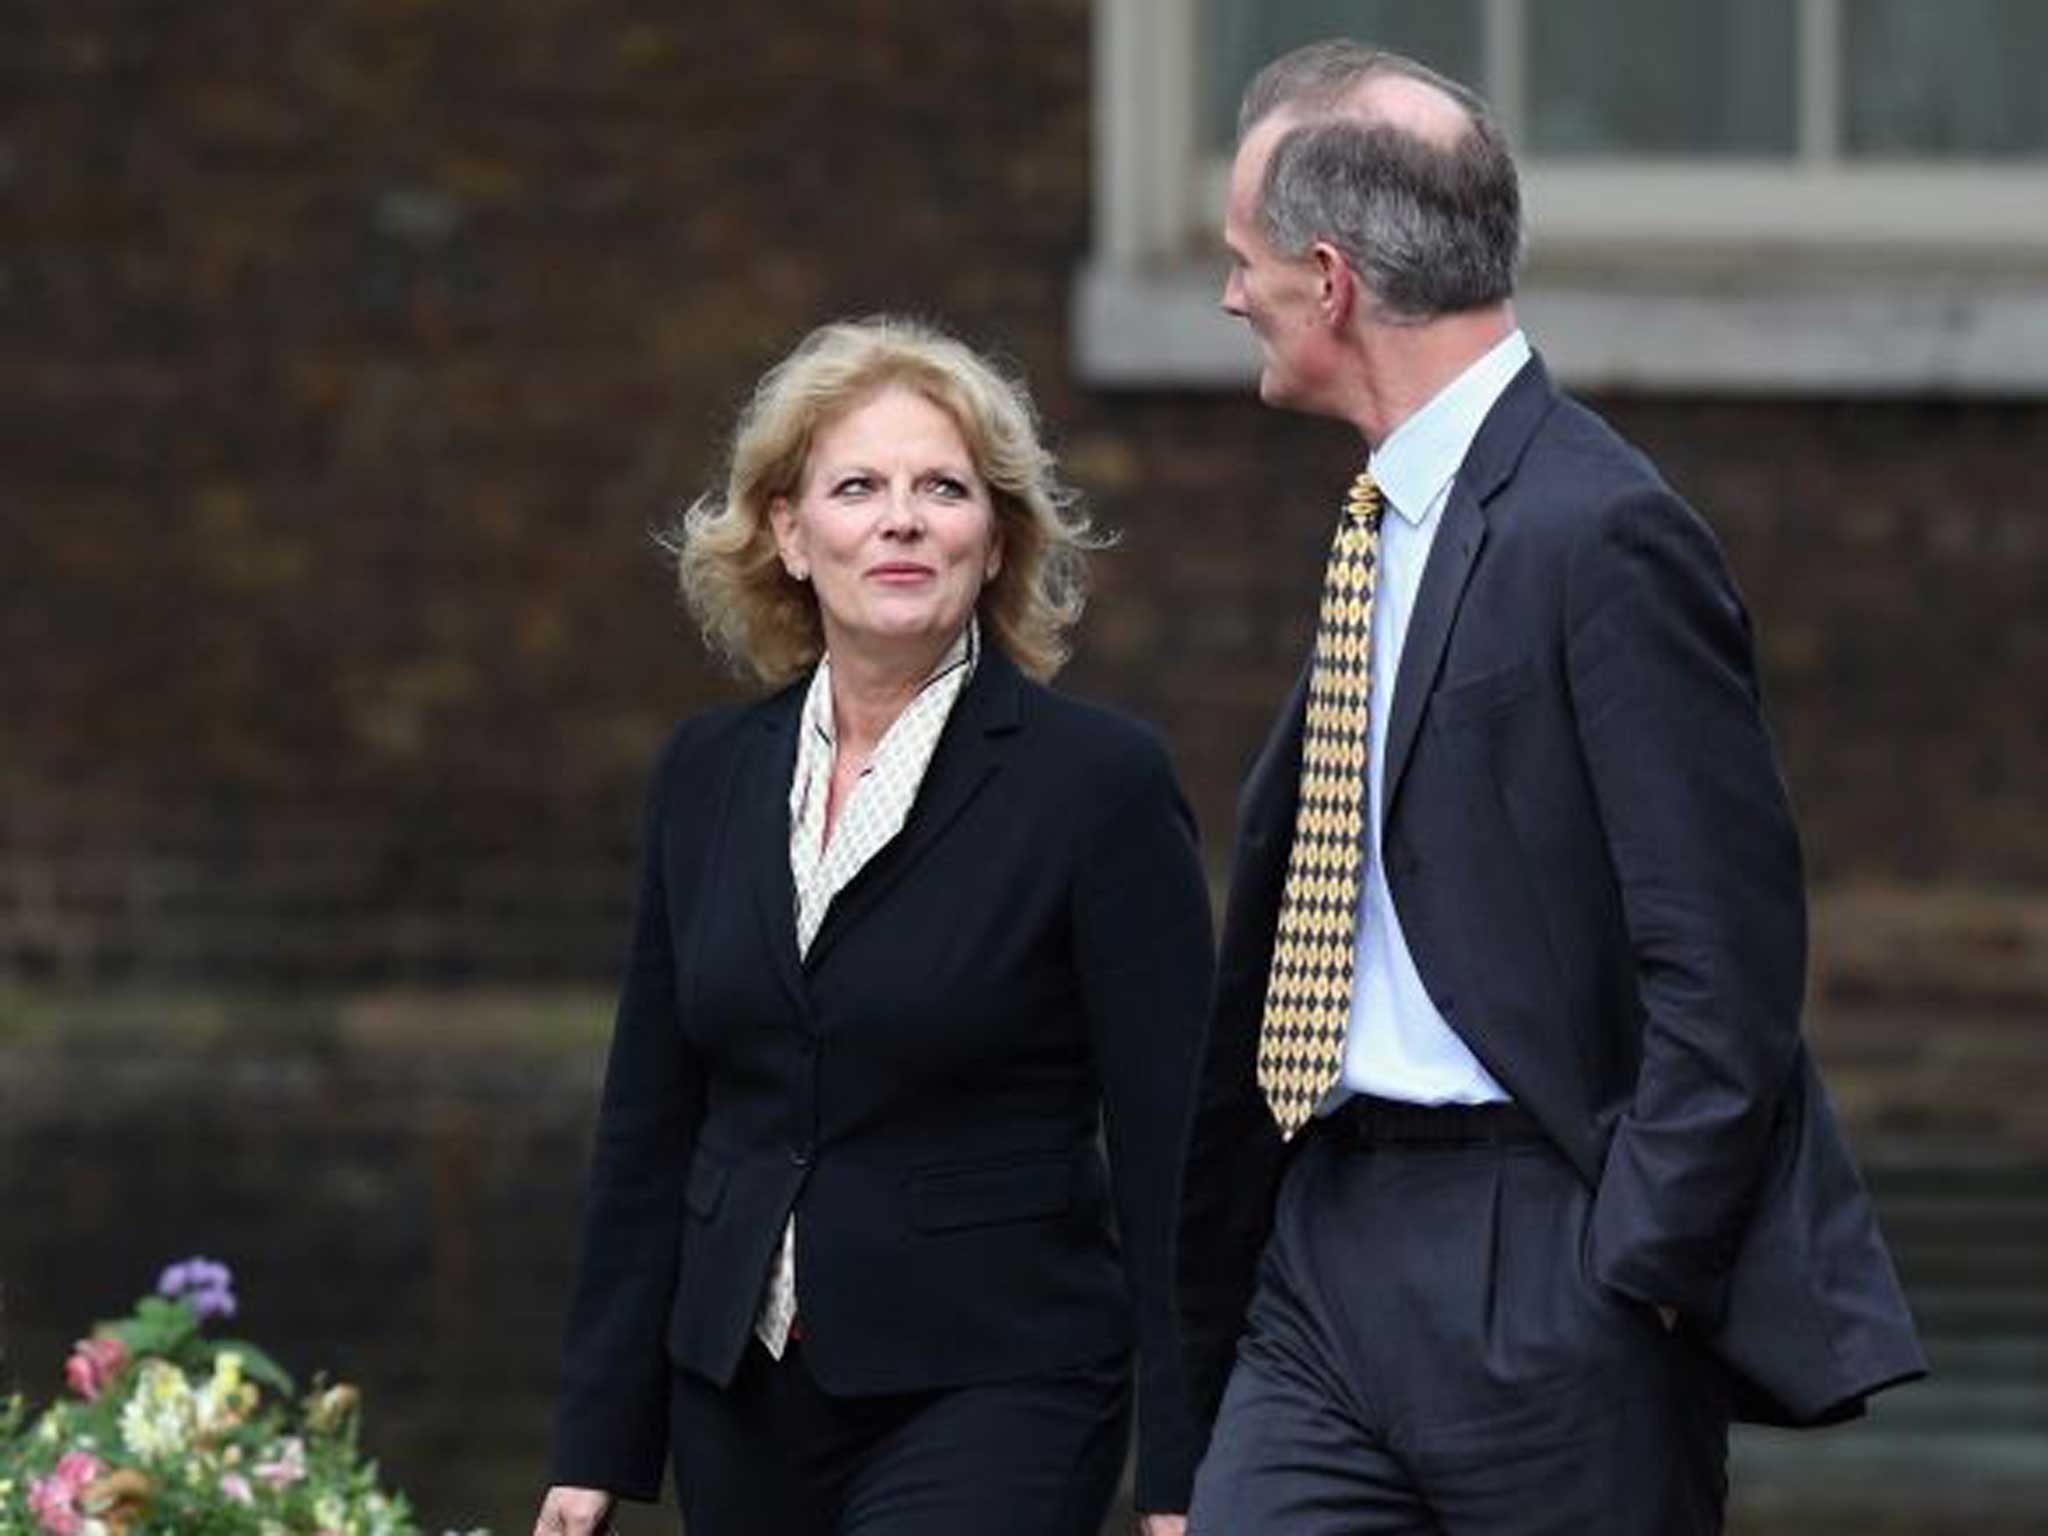 Soubry is unusual among politicians in that she has held two jobs prior to becoming an MP